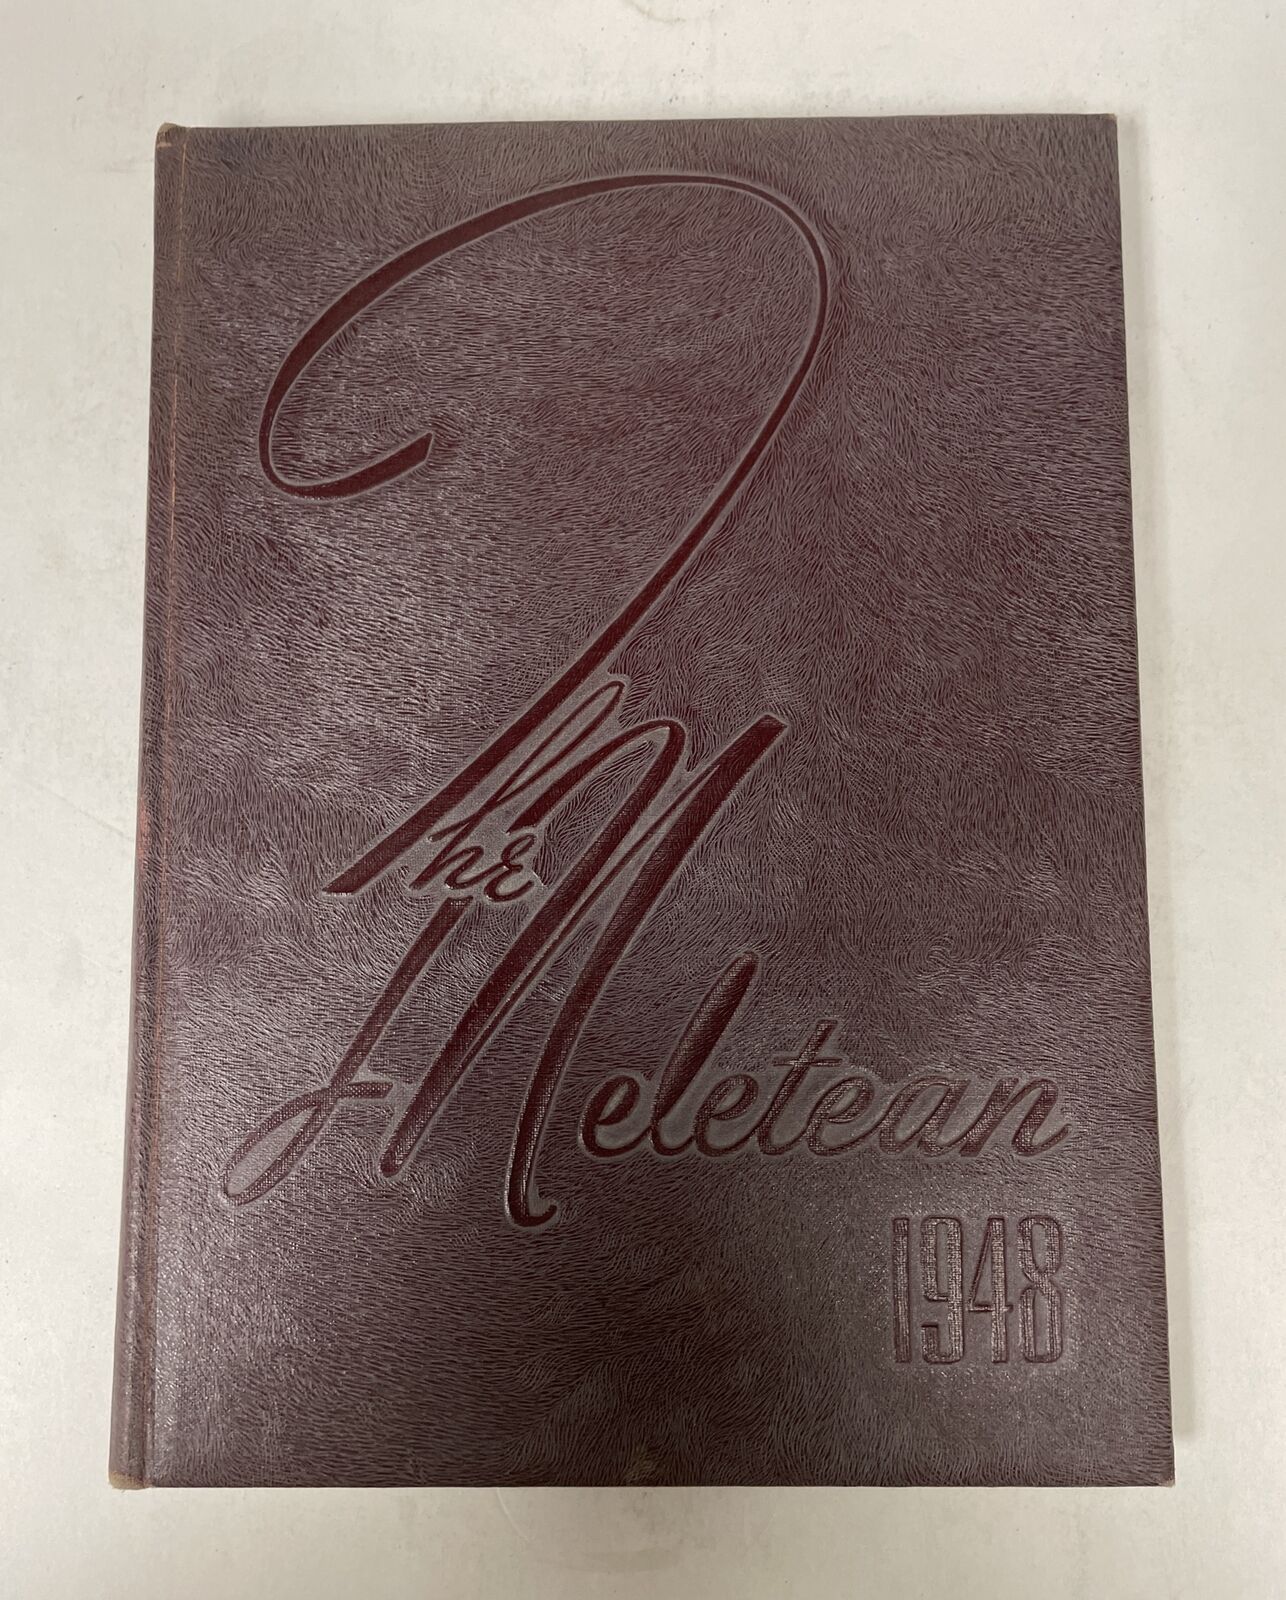 State Teachers College Yearbook 1948 | The Meletean